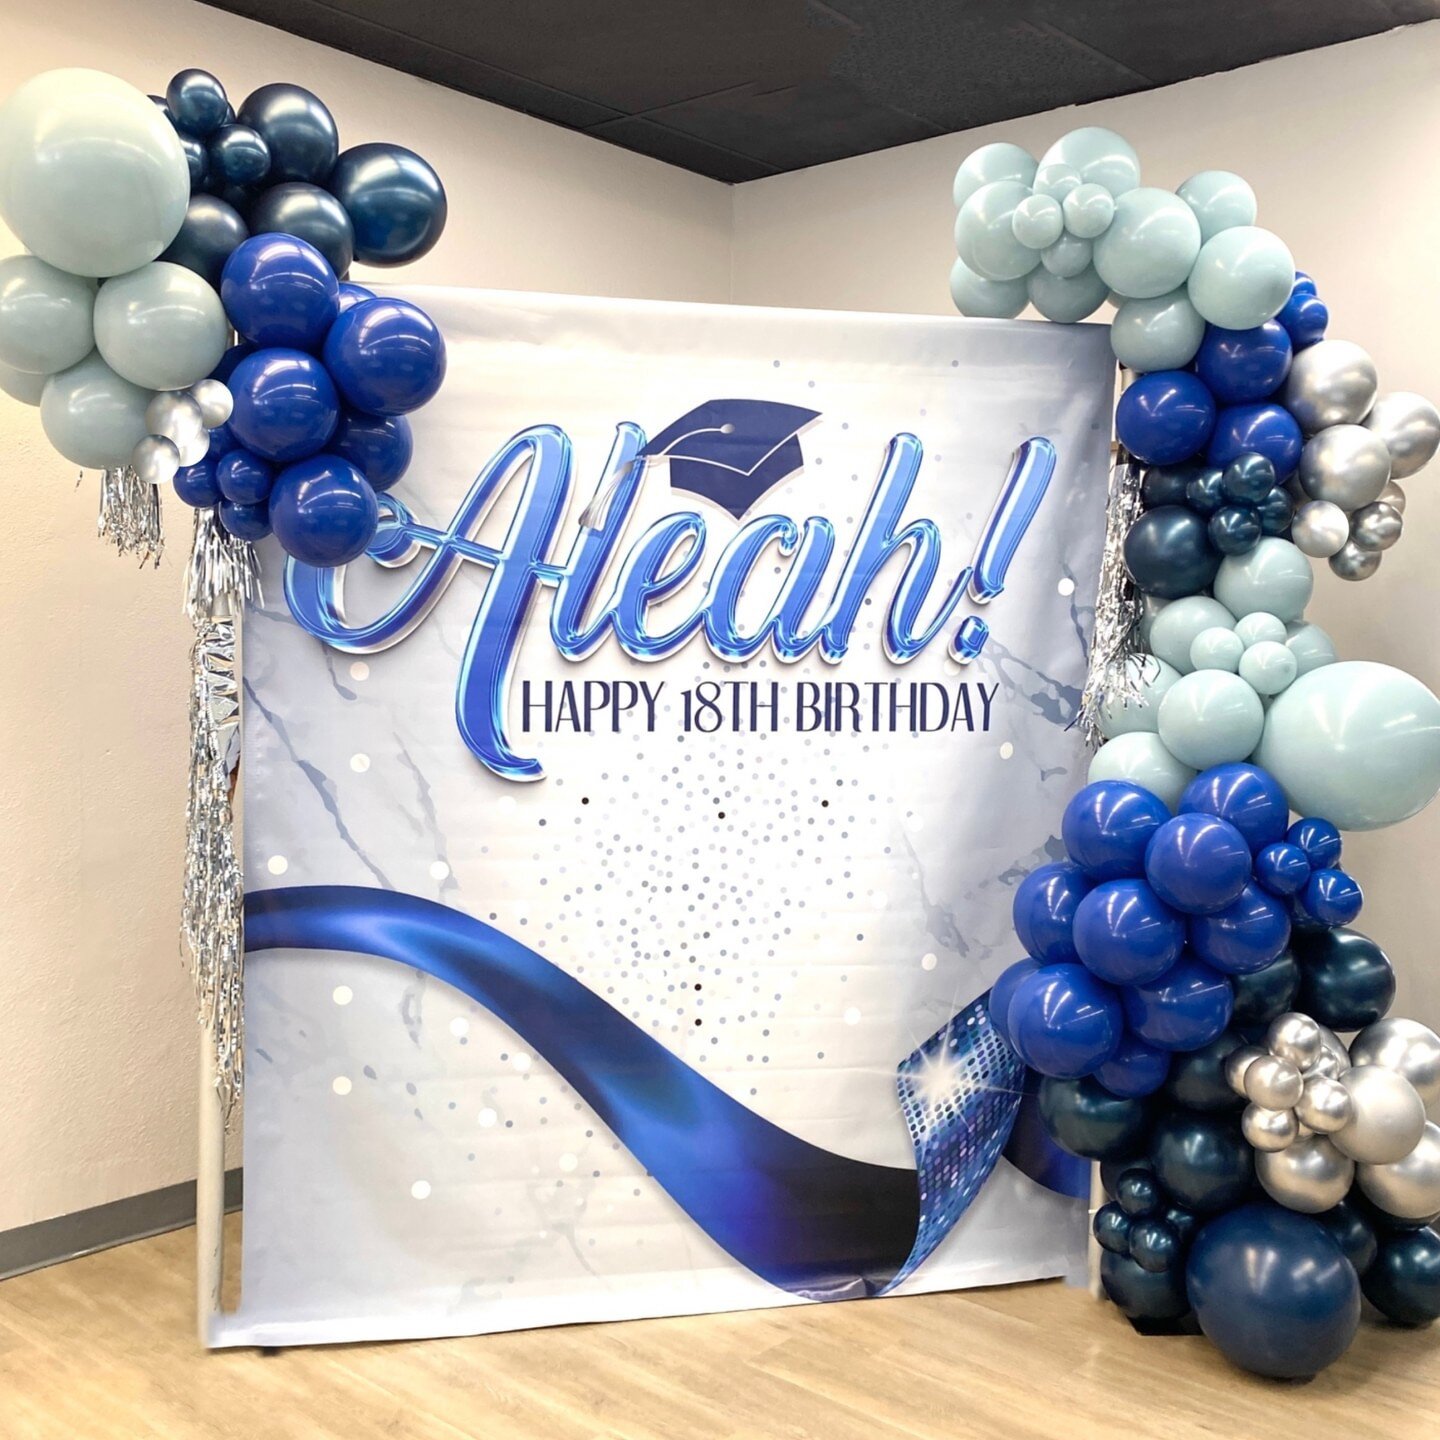 Loved these colors! Happy birthday and graduation to Miss Aleah 🎉 
*
*
*
#partyinspo #partydecor #partydecorations #birthdaypartyinspo #themedpartyideas #diypartyideas #partyvibes #partylite #partycelebrations #partystyling #gradparty #graduationbal